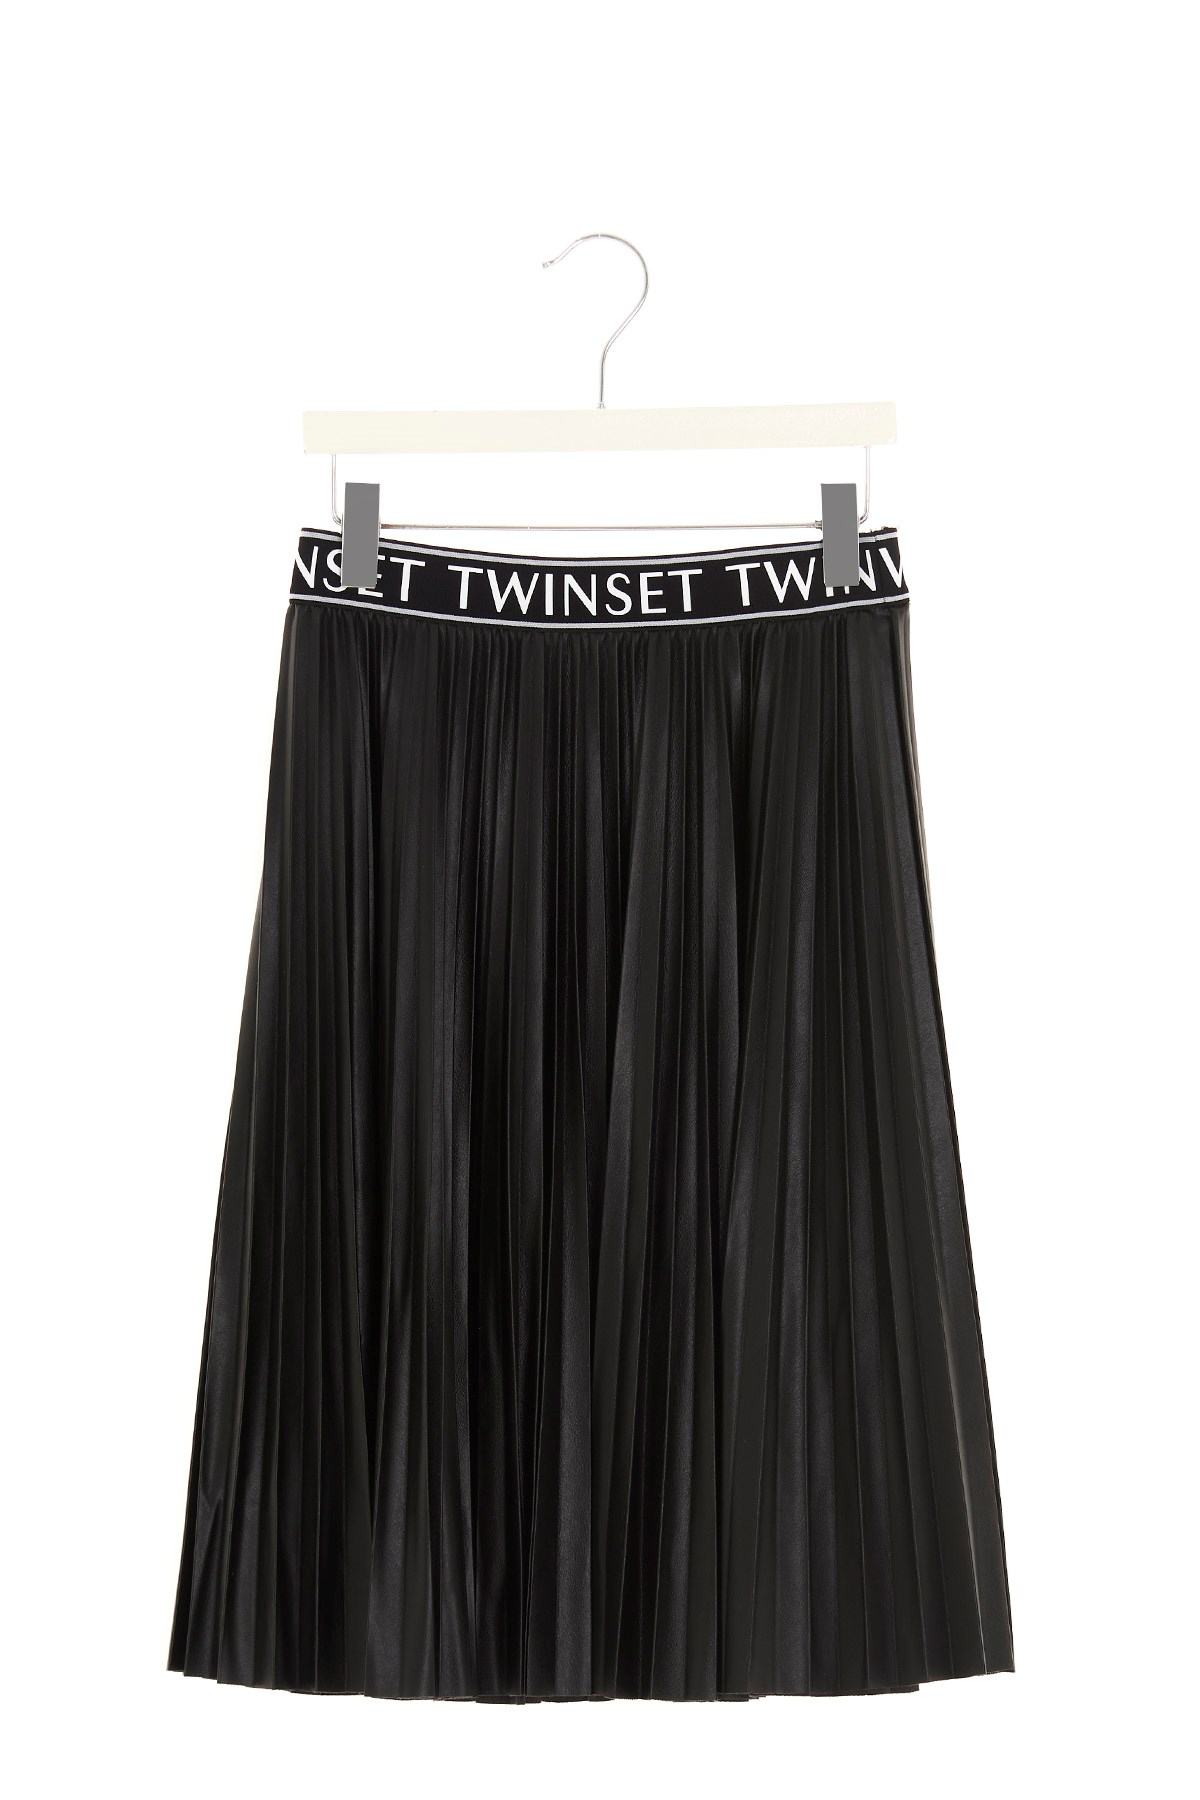 TWIN SET Pleated Eco Leather Skirt